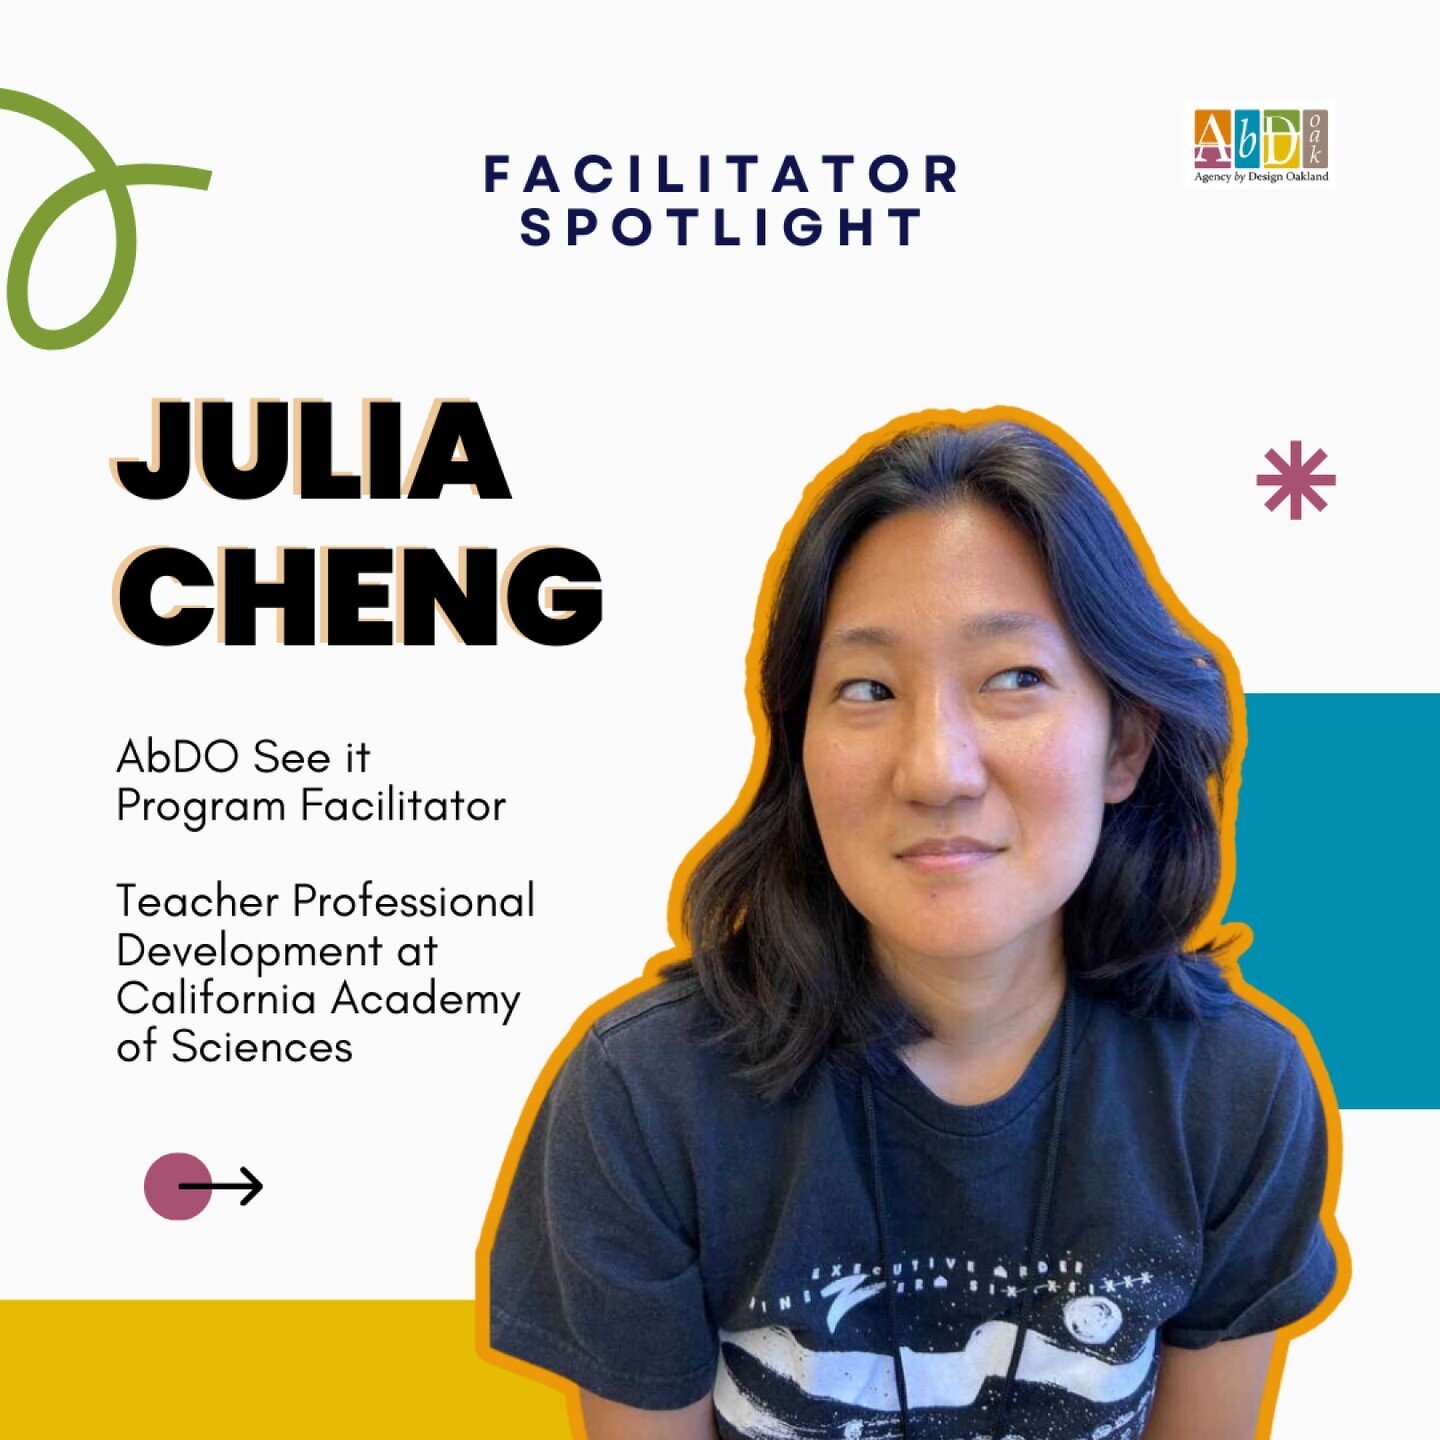 ✨Meet our team! ✨

We&rsquo;re starting a series spotlighting the incredible facilitators behind our programs. Each of the educators who work with us creates their own special sauce that brings our programs to life. 🌱

First up, meet Julia Cheng who